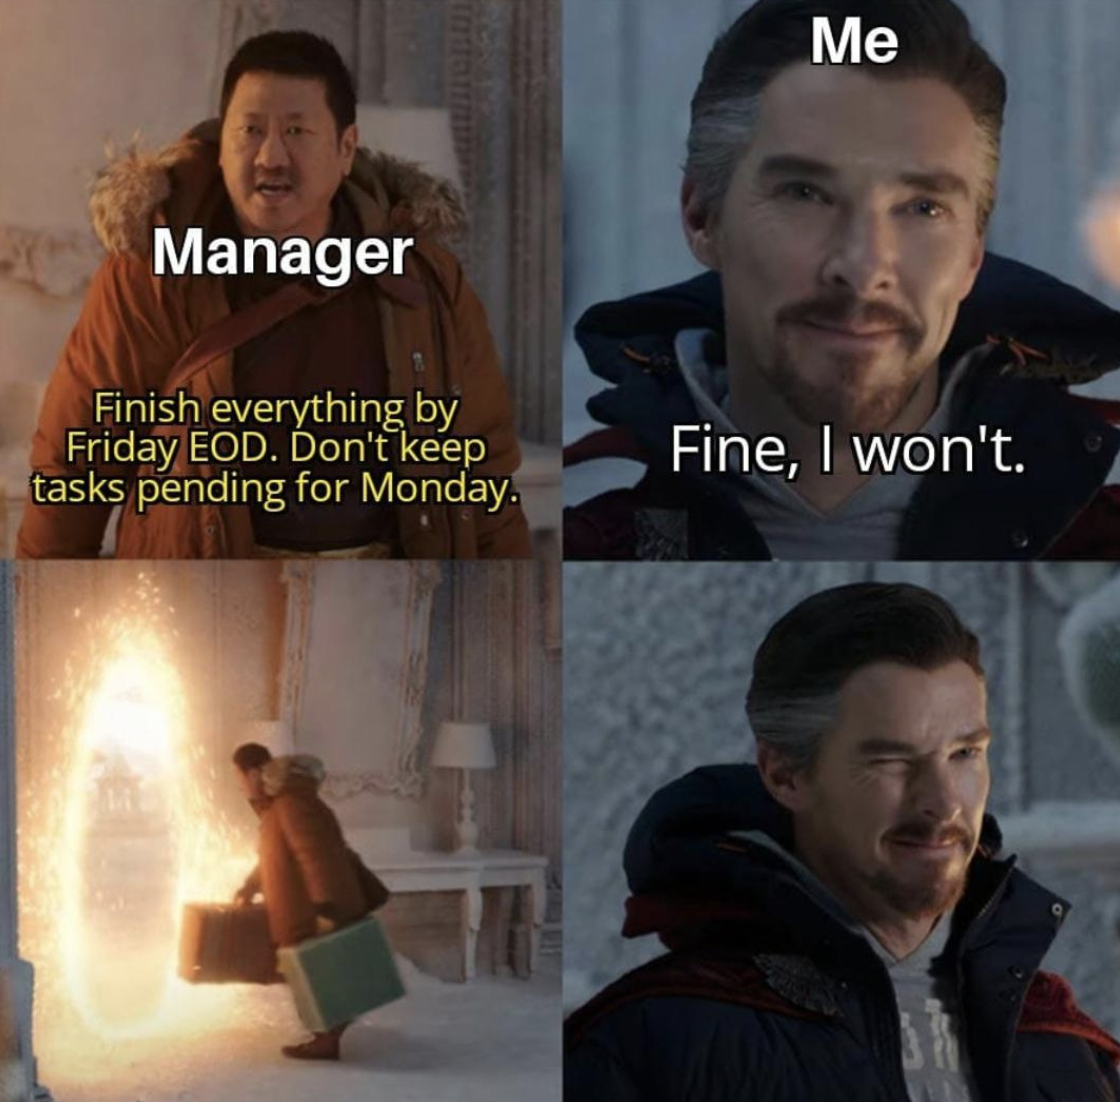 cgi memes - Me Manager Finish everything by Friday Eod. Don't keep tasks pending for Monday. Fine, I won't.